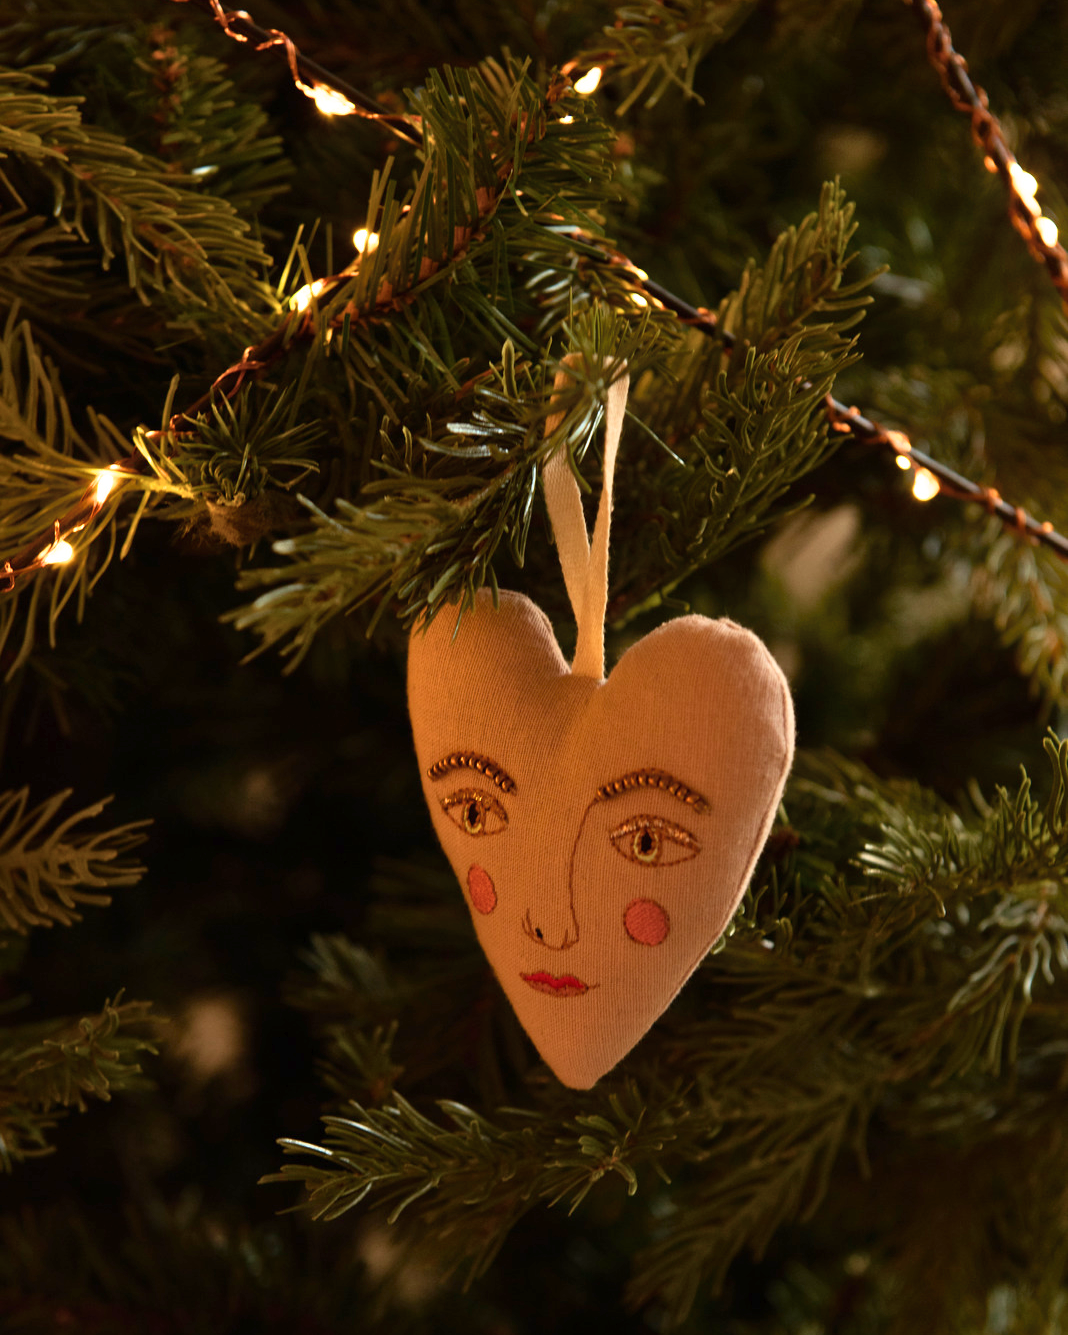 Handsome Heart Ornament